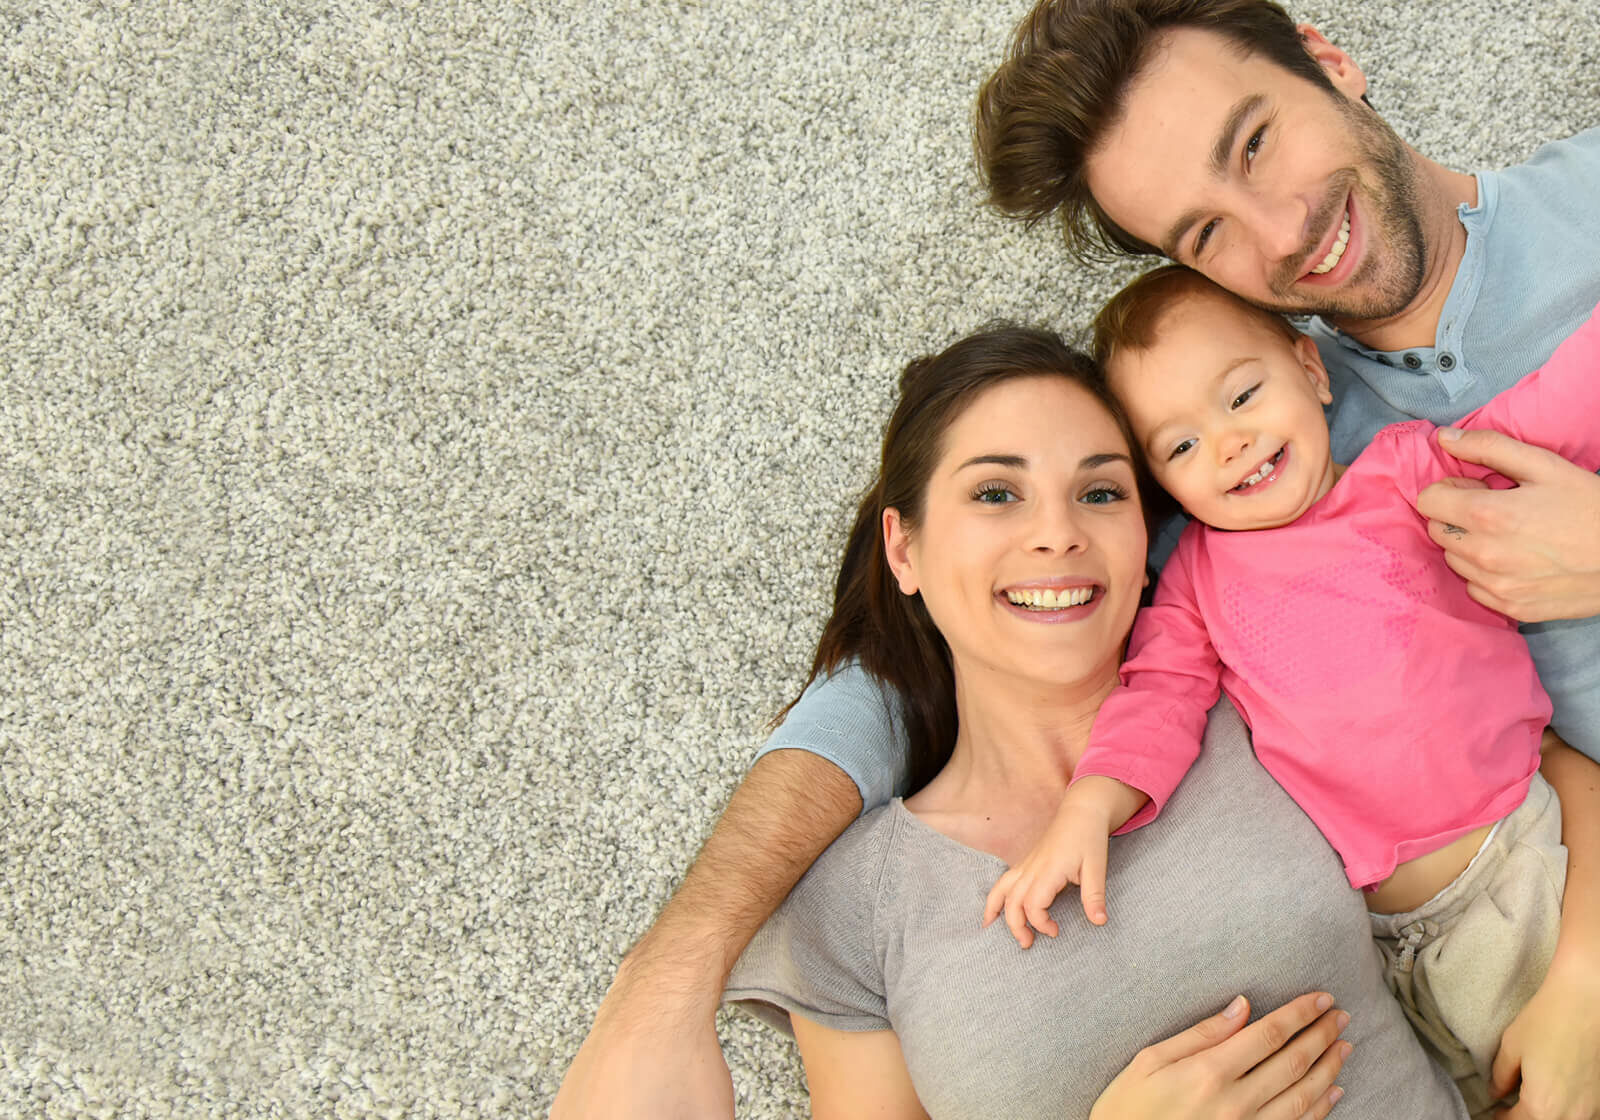 Couple laying on carpet floor with their child | Gateway Floors